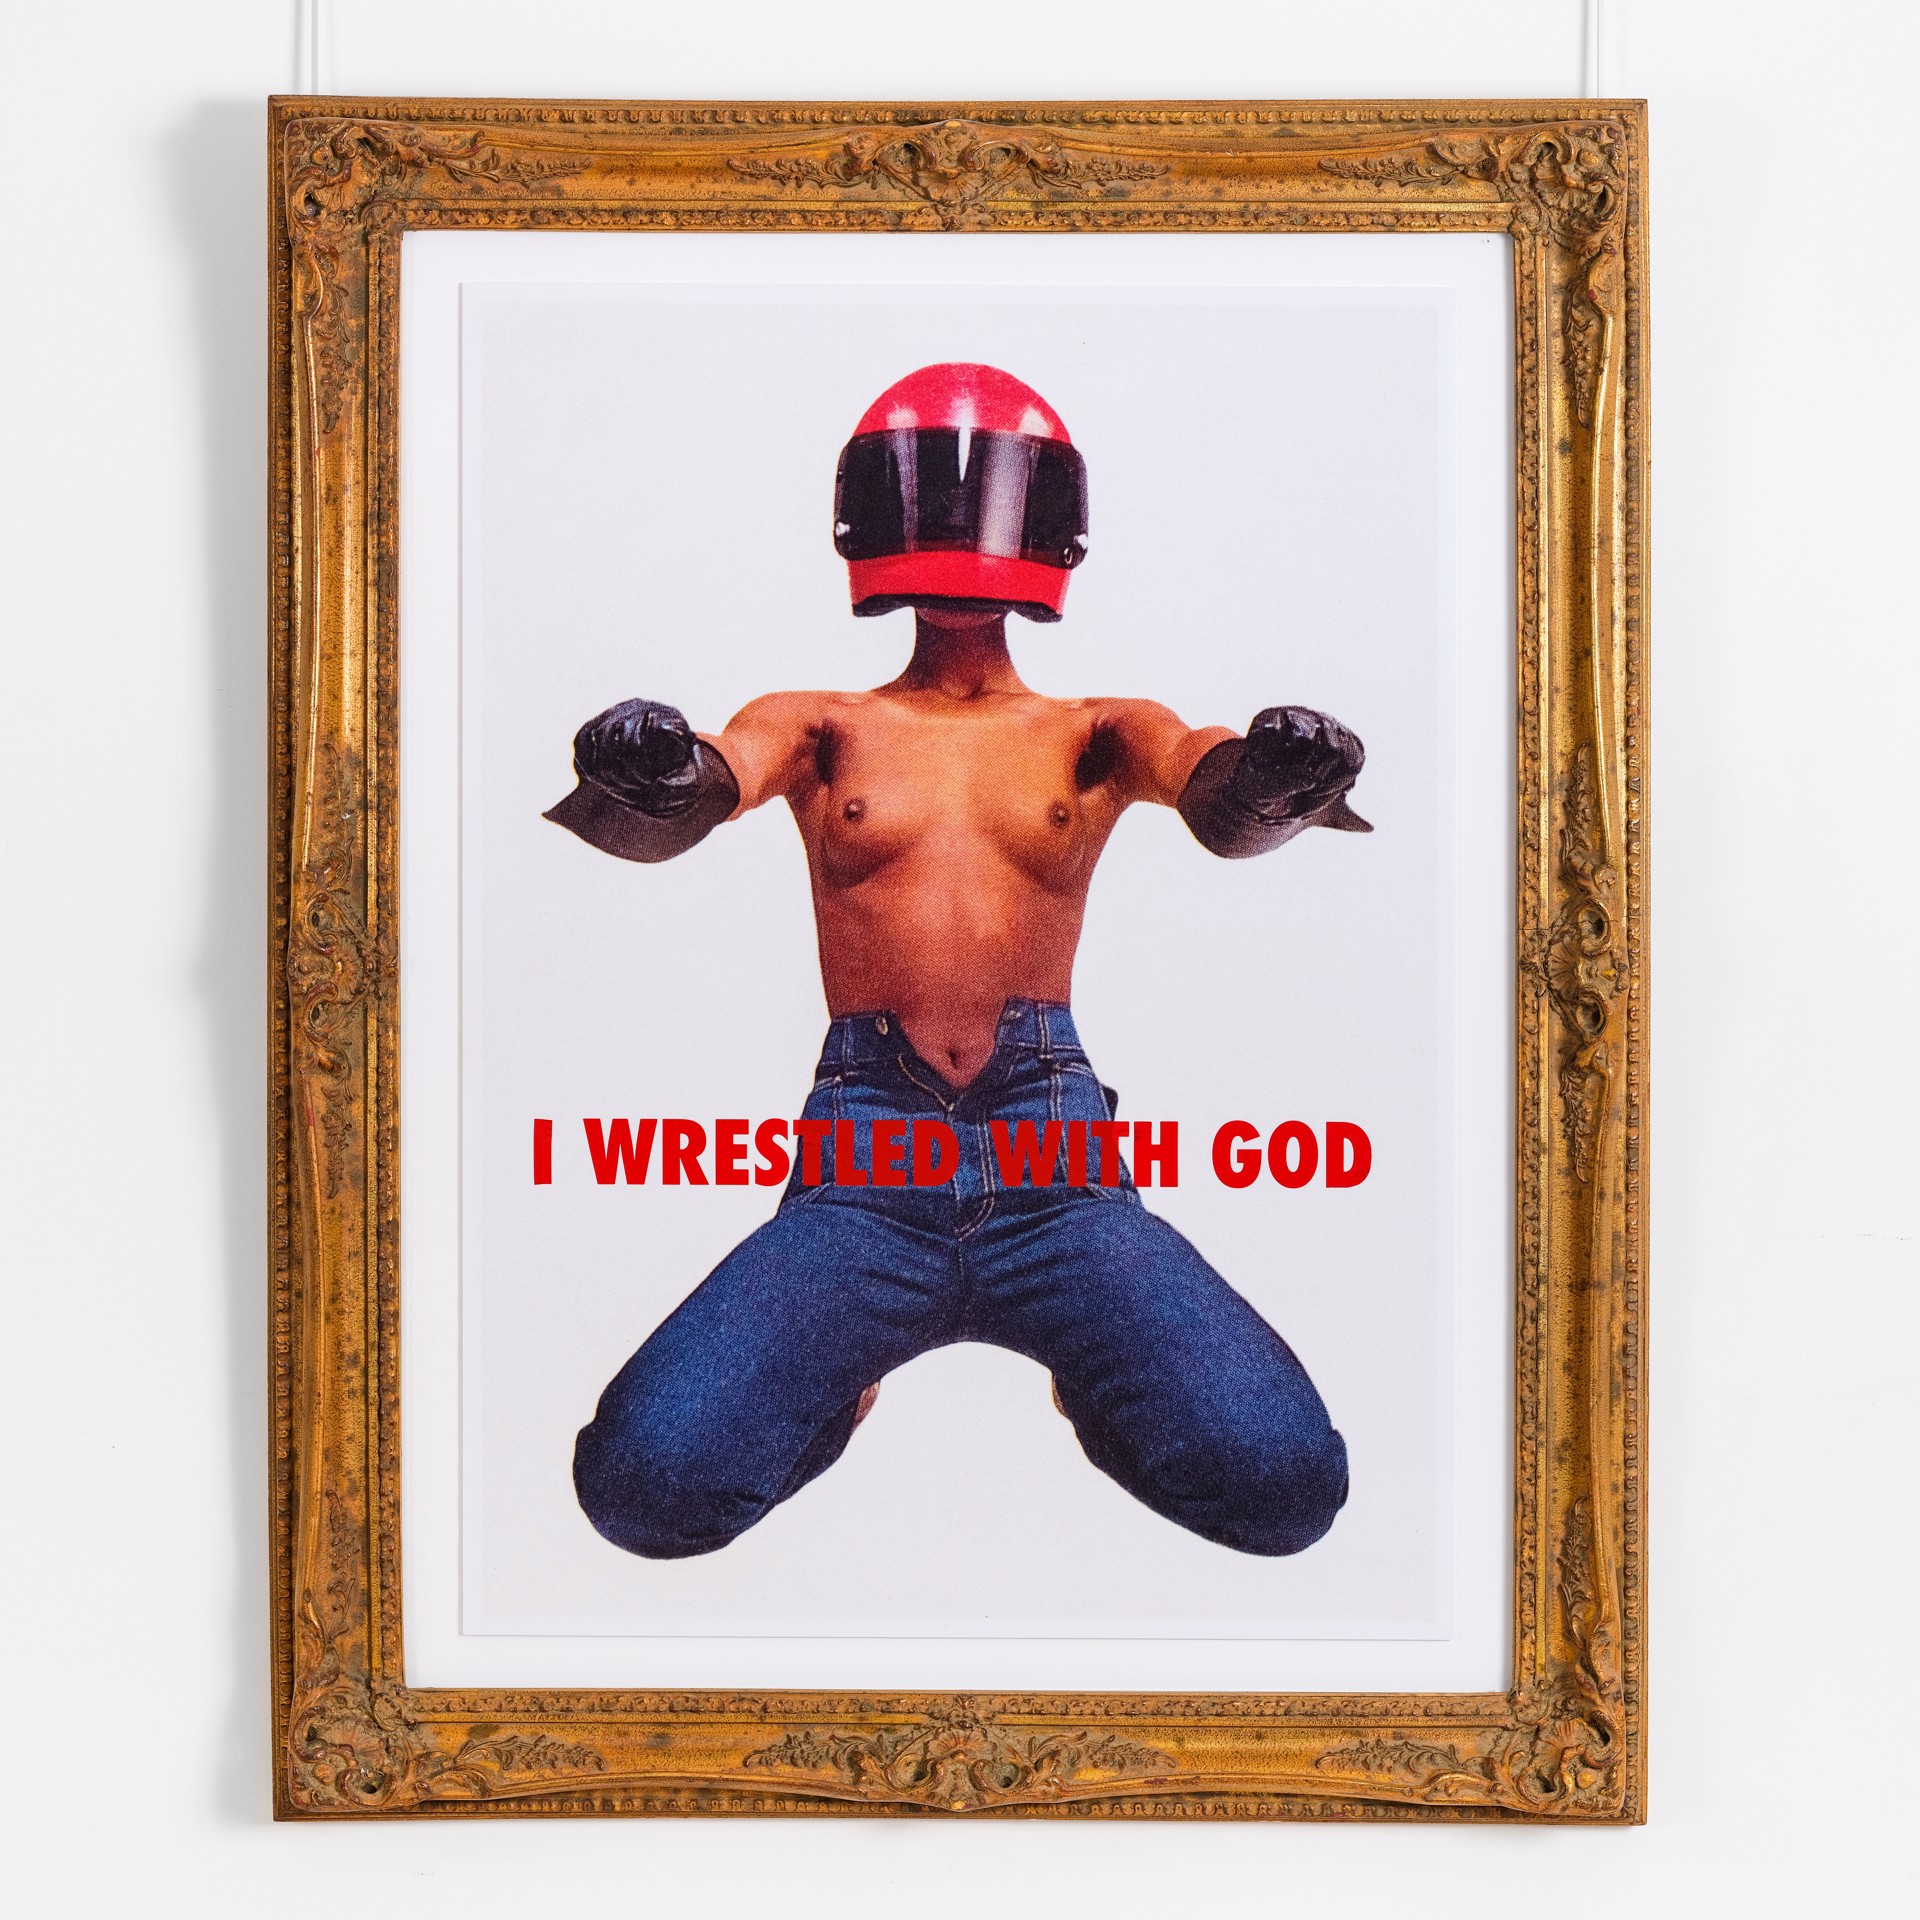 I wrestled with God by Reed Weily